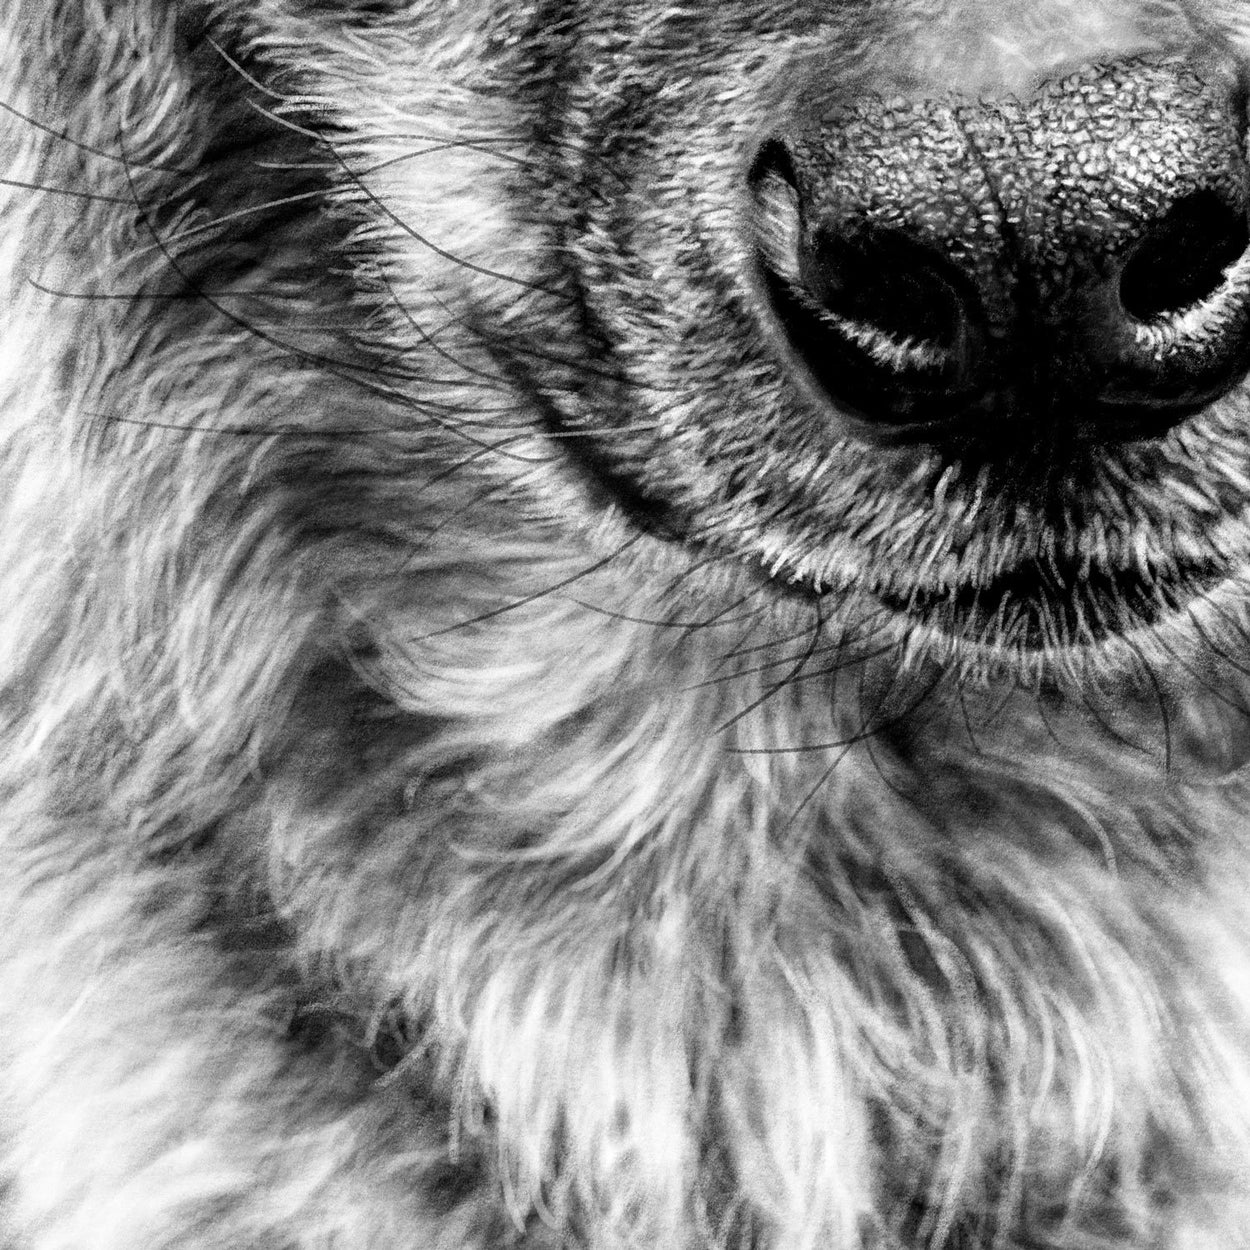 Hyena Digital Drawing Close-up - The Thriving Wild